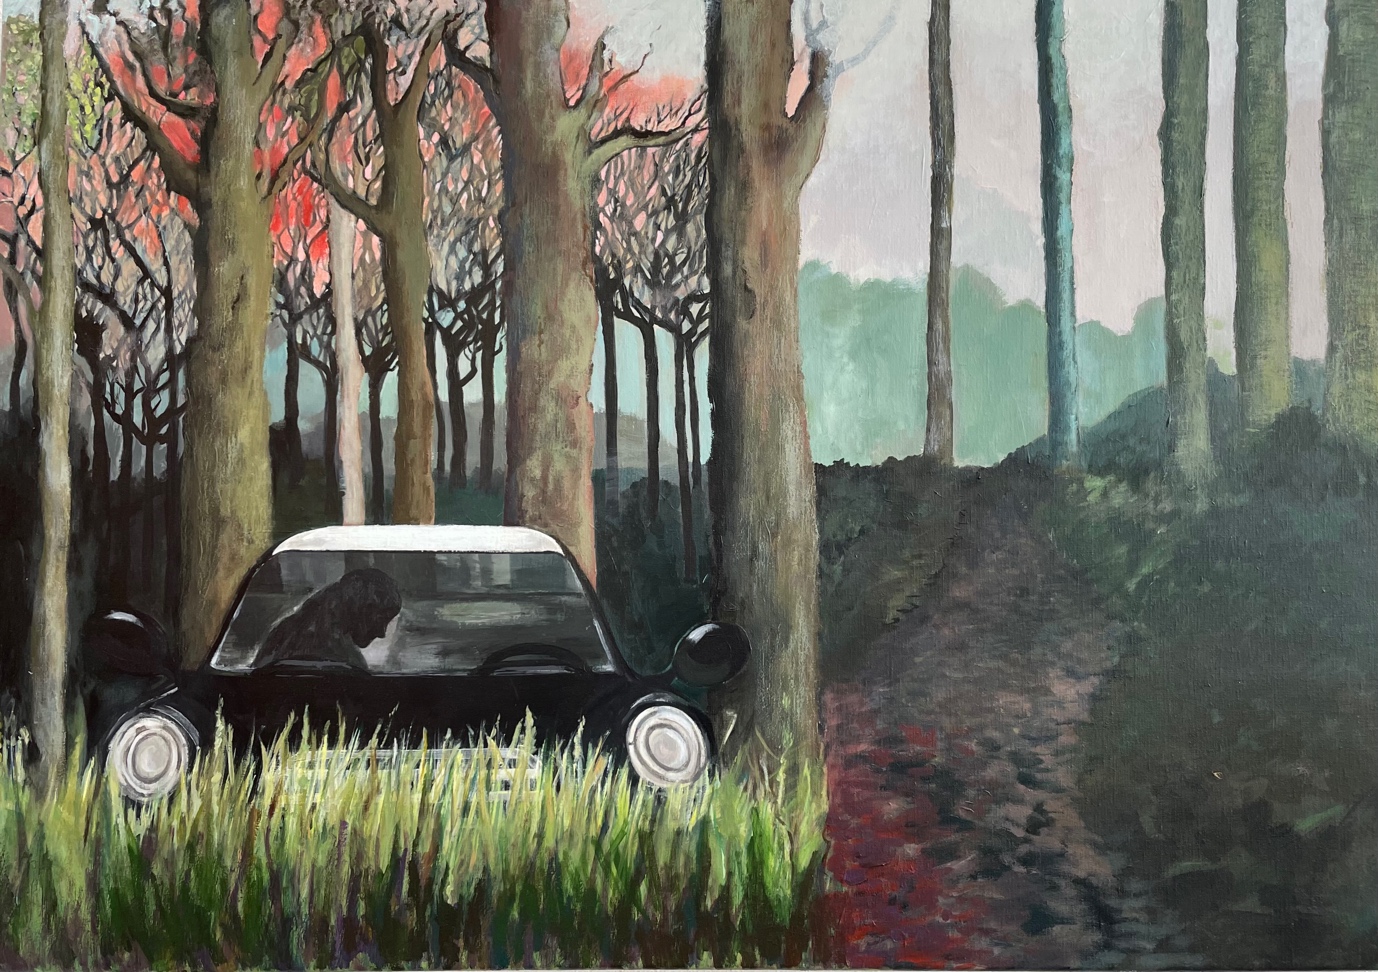 A car driving through a forest

Description automatically generated with low confidence